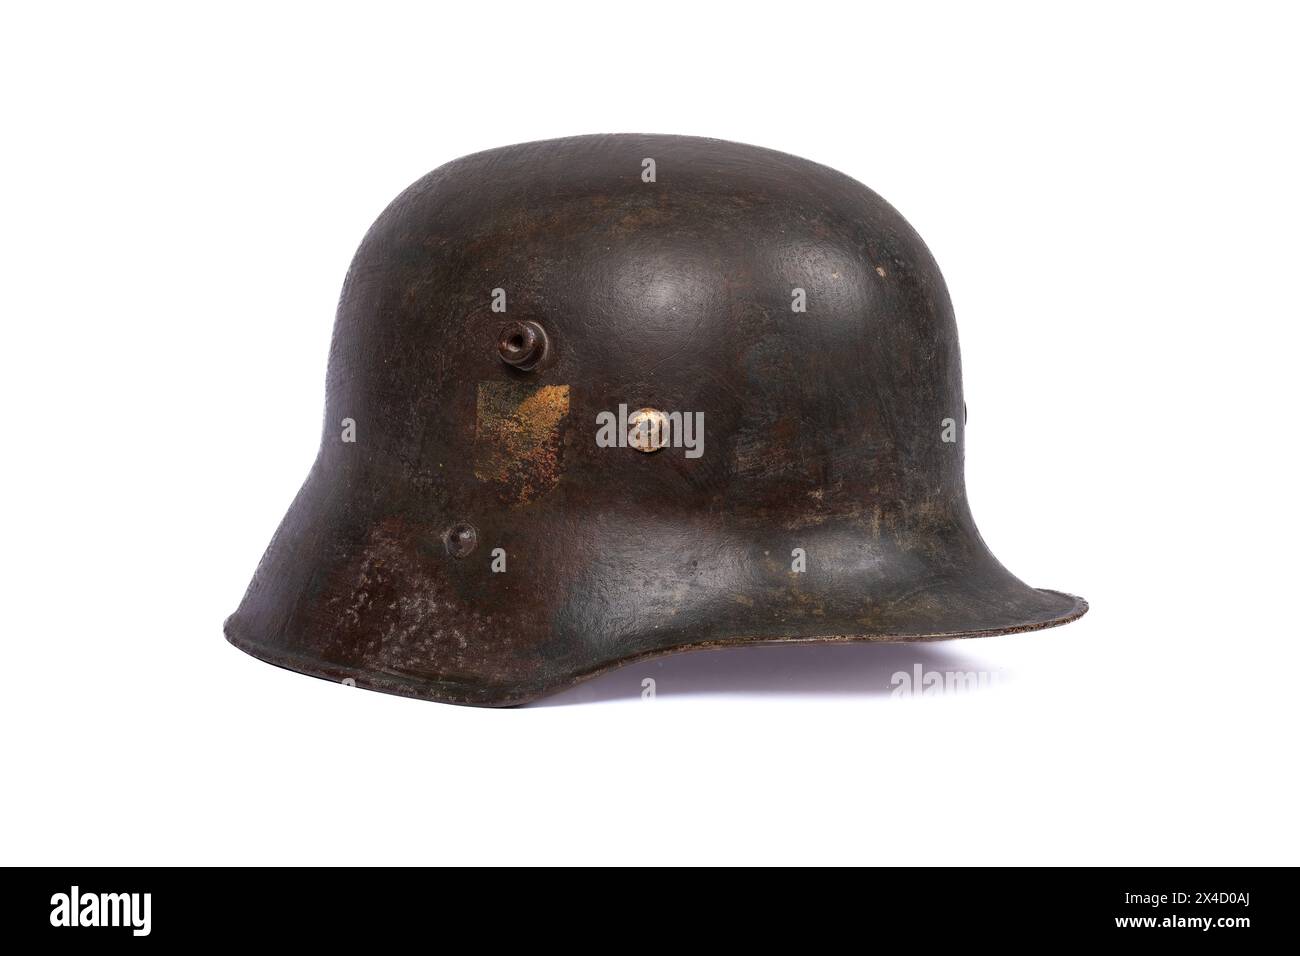 Vintage German Steel Helmet WWII Military Collectible on White Background Stock Photo